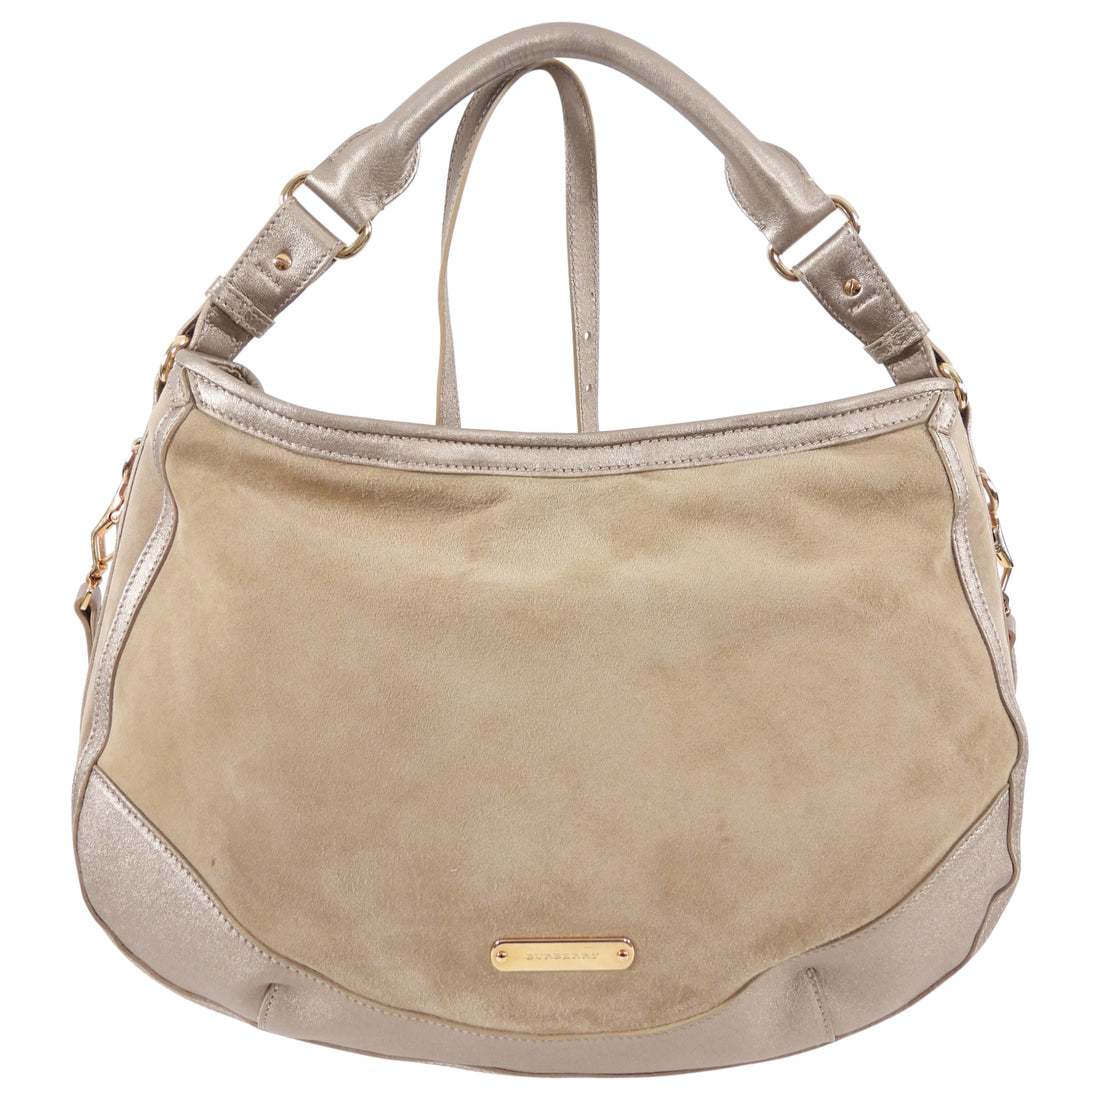 Burberry Light Beige Suede and Leather Hobo Bag